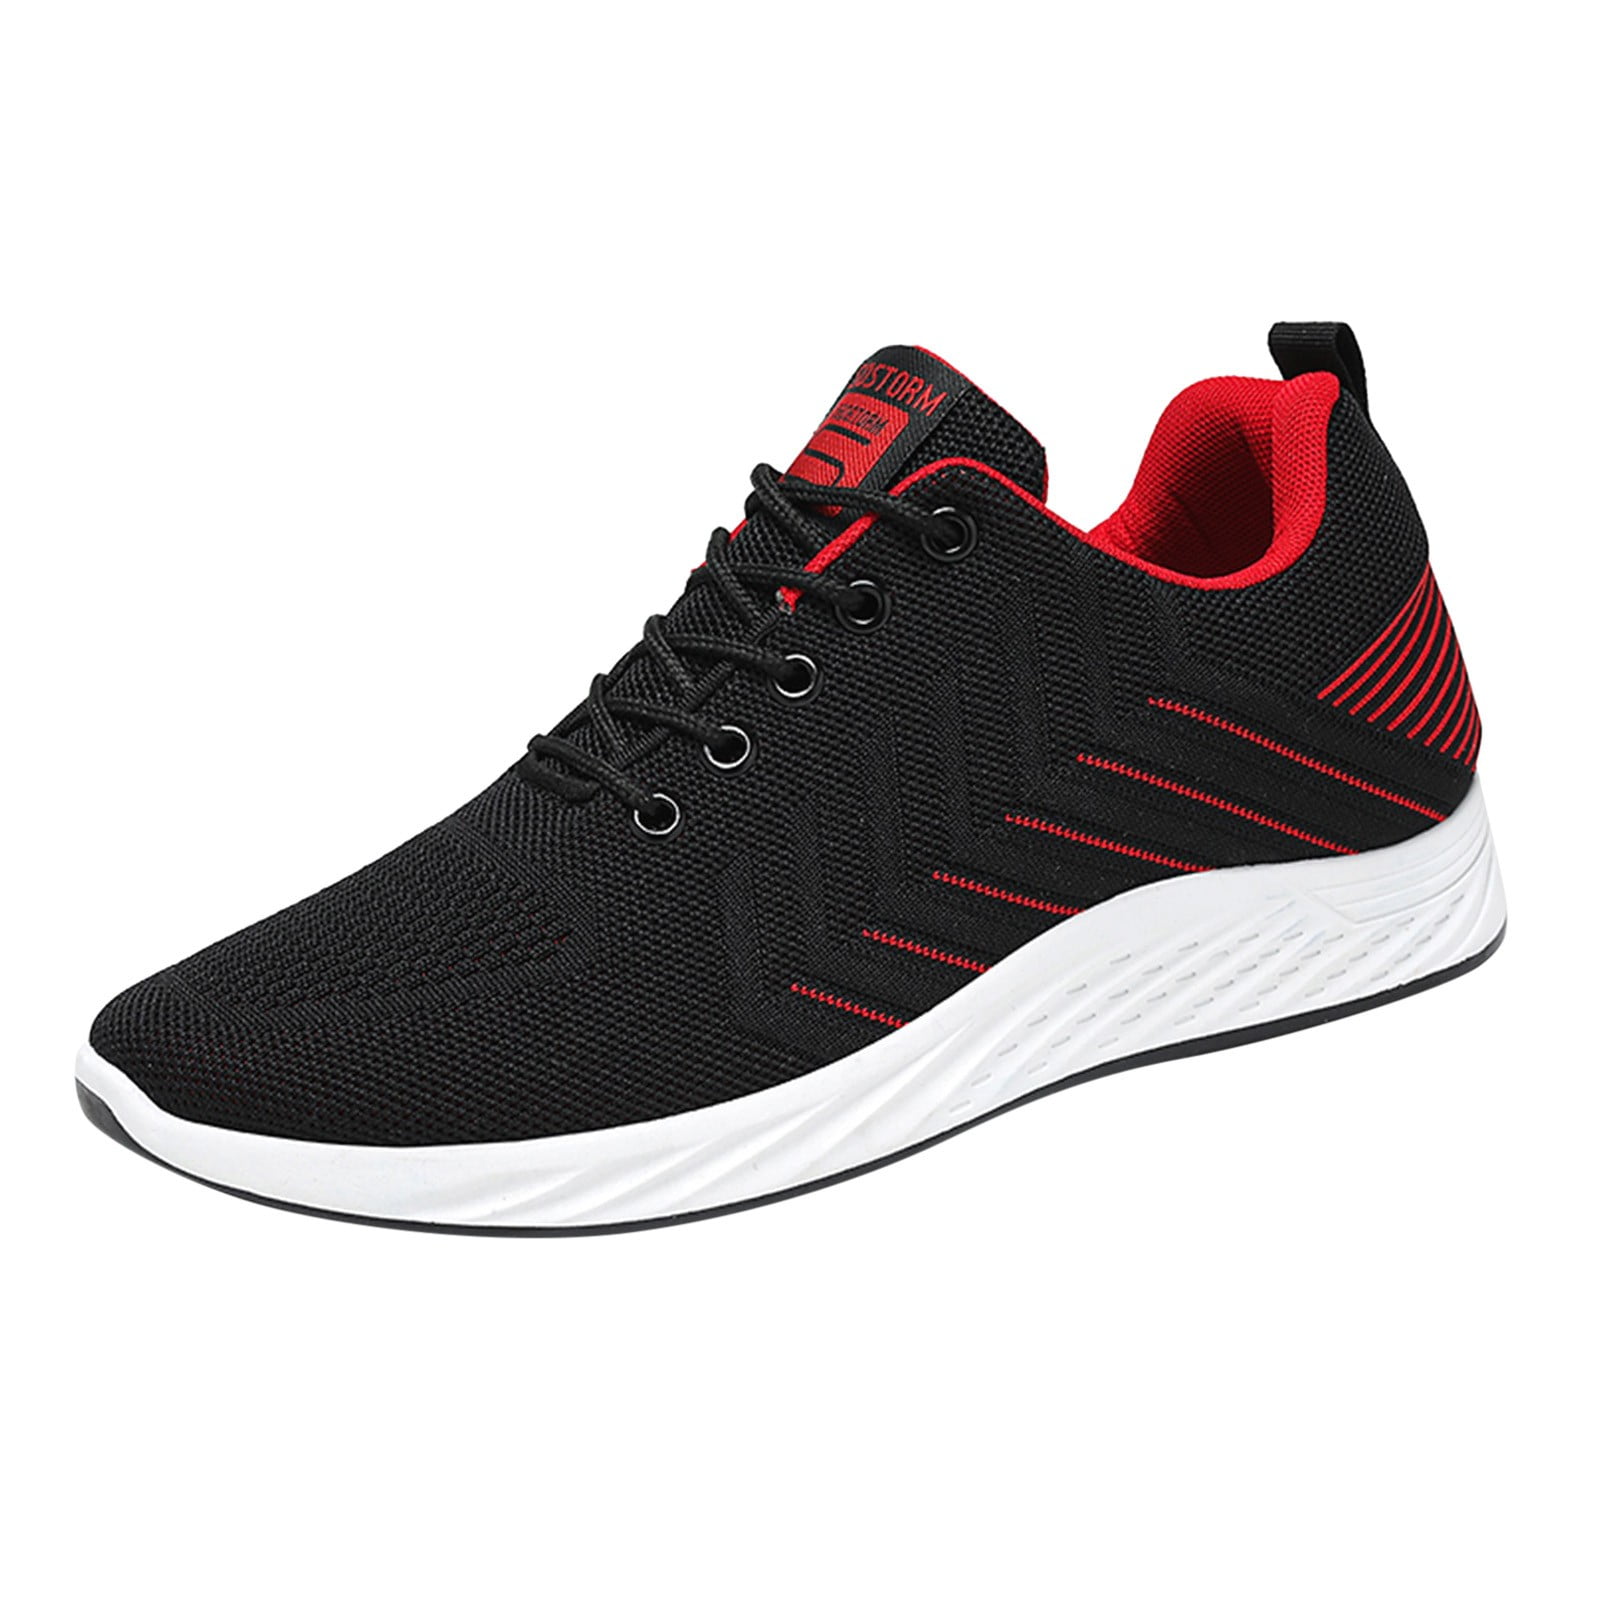 Fashion Men Causal Shoes Designer Sneakers Outdoor Luxury Basketball Shoes  Platform Comfortable Sports Casual Soft-soled Shoes